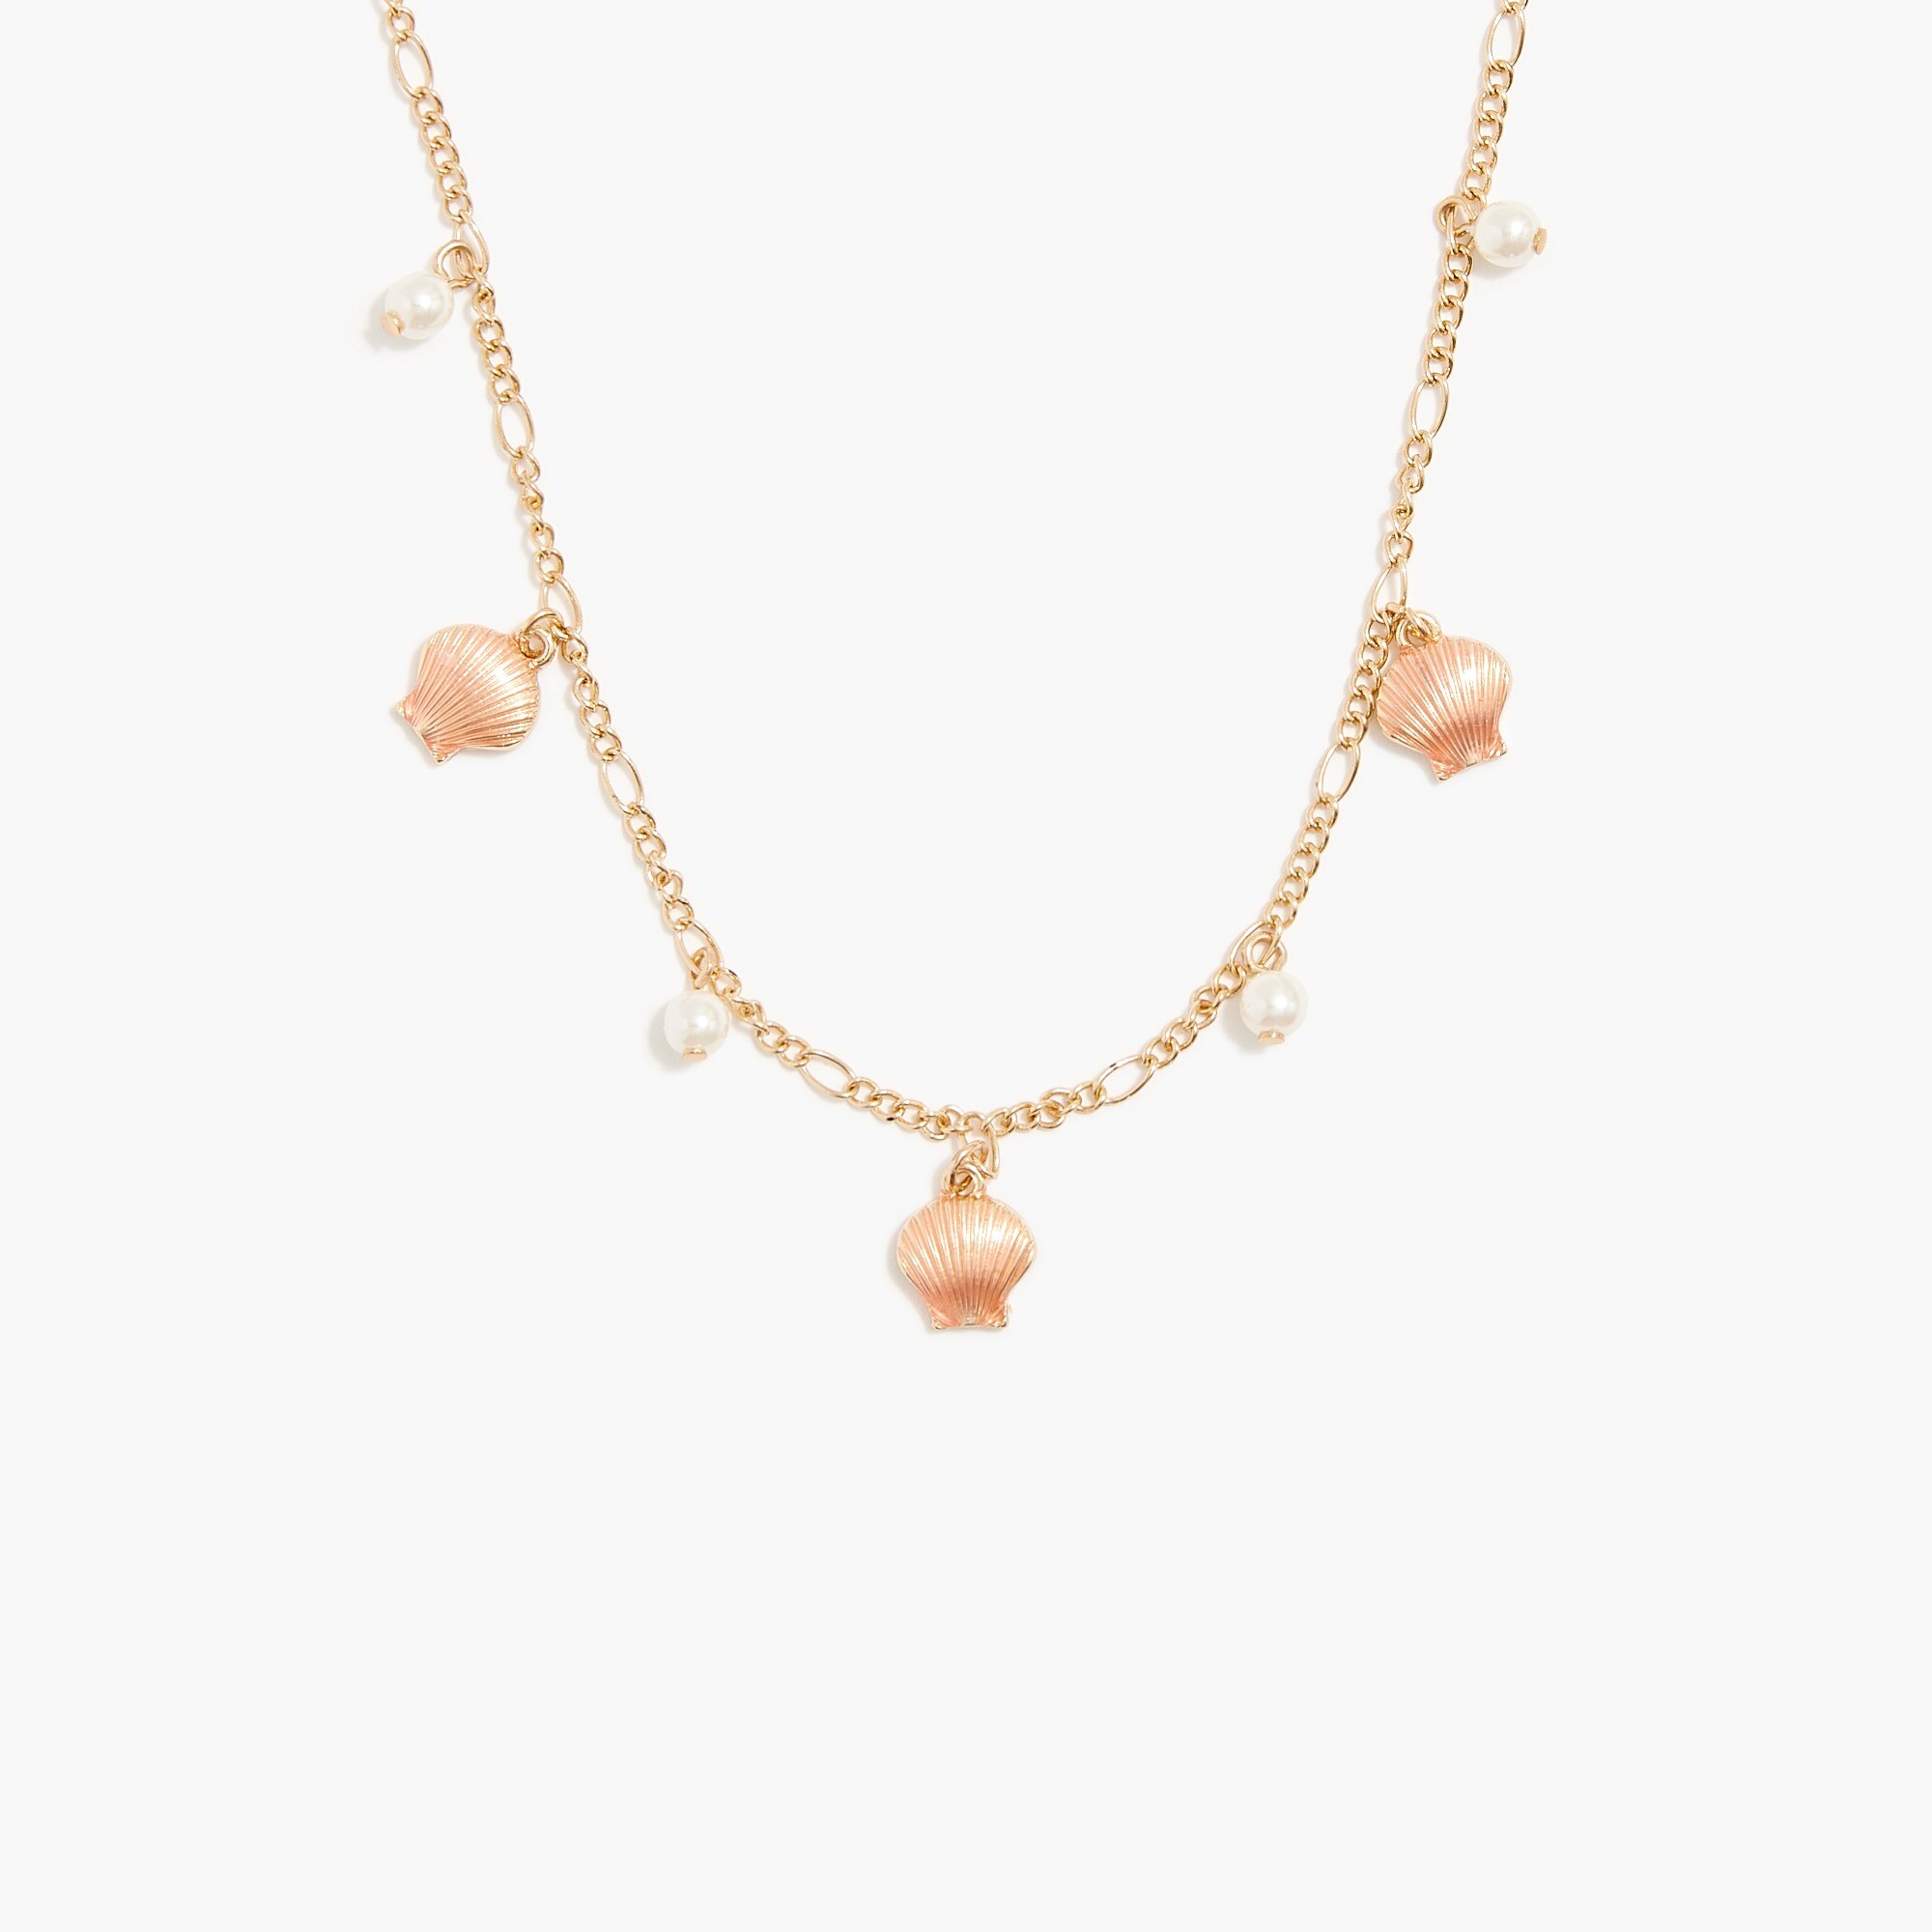  Girls' shell pearl charm necklace